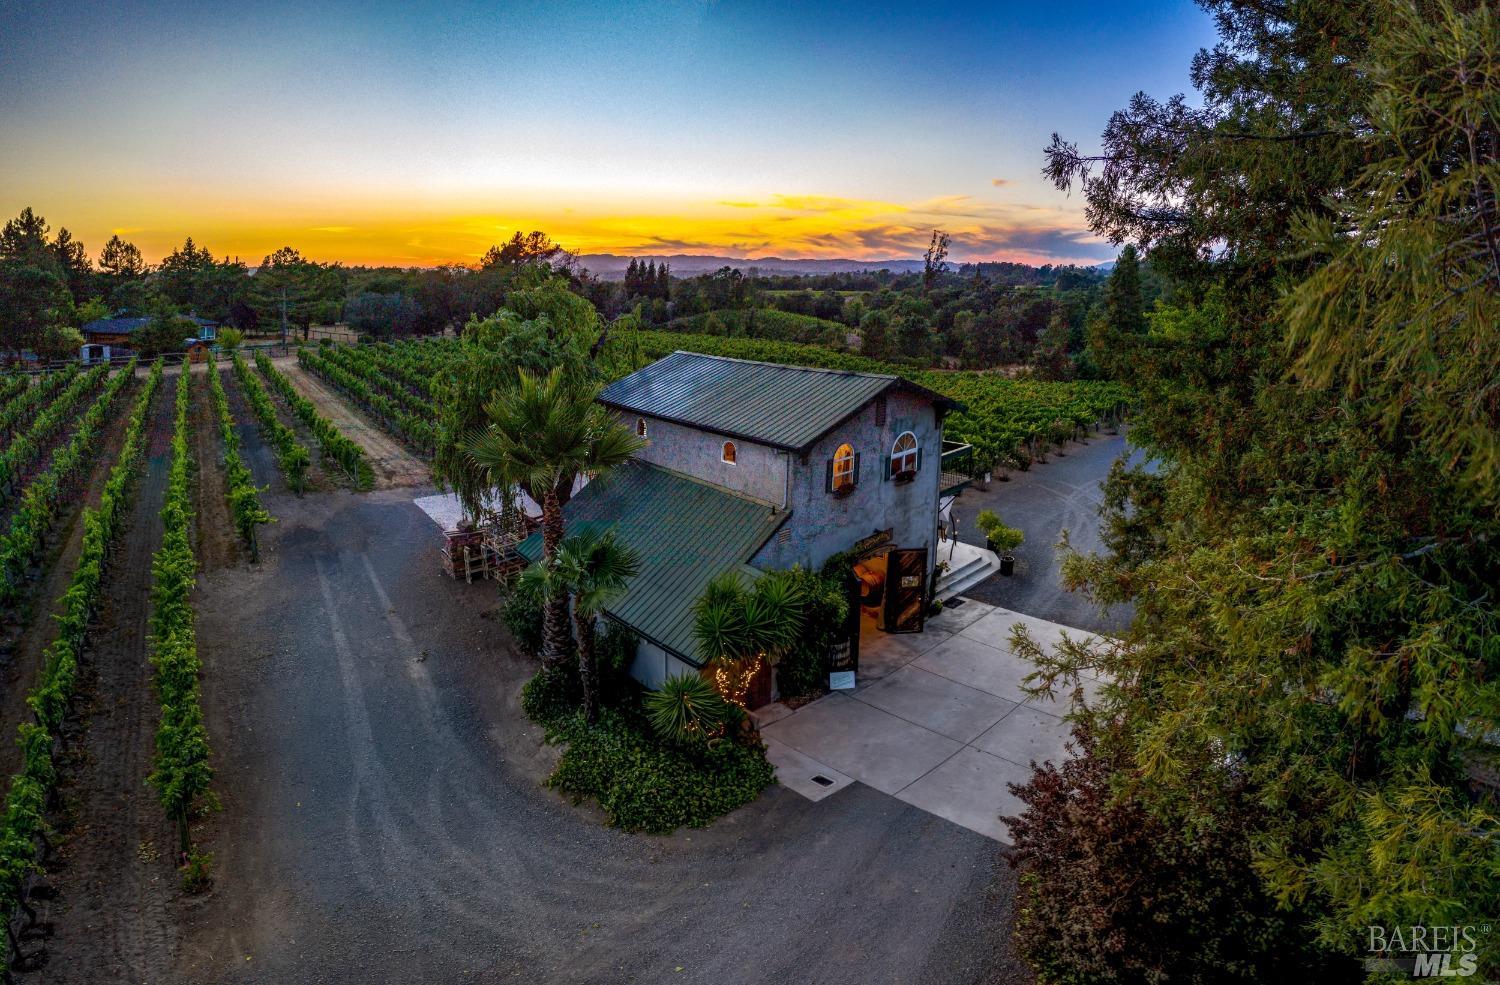 Sonoma County Winery and Estate Property all in one!! This is an incredible opportunity to own and live at your own boutique winery in the Russian River Valley. This unique offering is comprised of 7.63 acres, with just over 5 -acres planted to award winning Cabernet vines. The main estate residence includes 2 bedrooms, 2 bathrooms and a loft; along with a separate apartment above the garage. The charming old world barrel room building is perfect for tastings, dinners and also includes a studio living unit upstairs. All complete with a separate bottling and case storage building, with an expansive loggia, outdoor kitchen and bocce-ball court. This sale includes a 500-case winery permit!